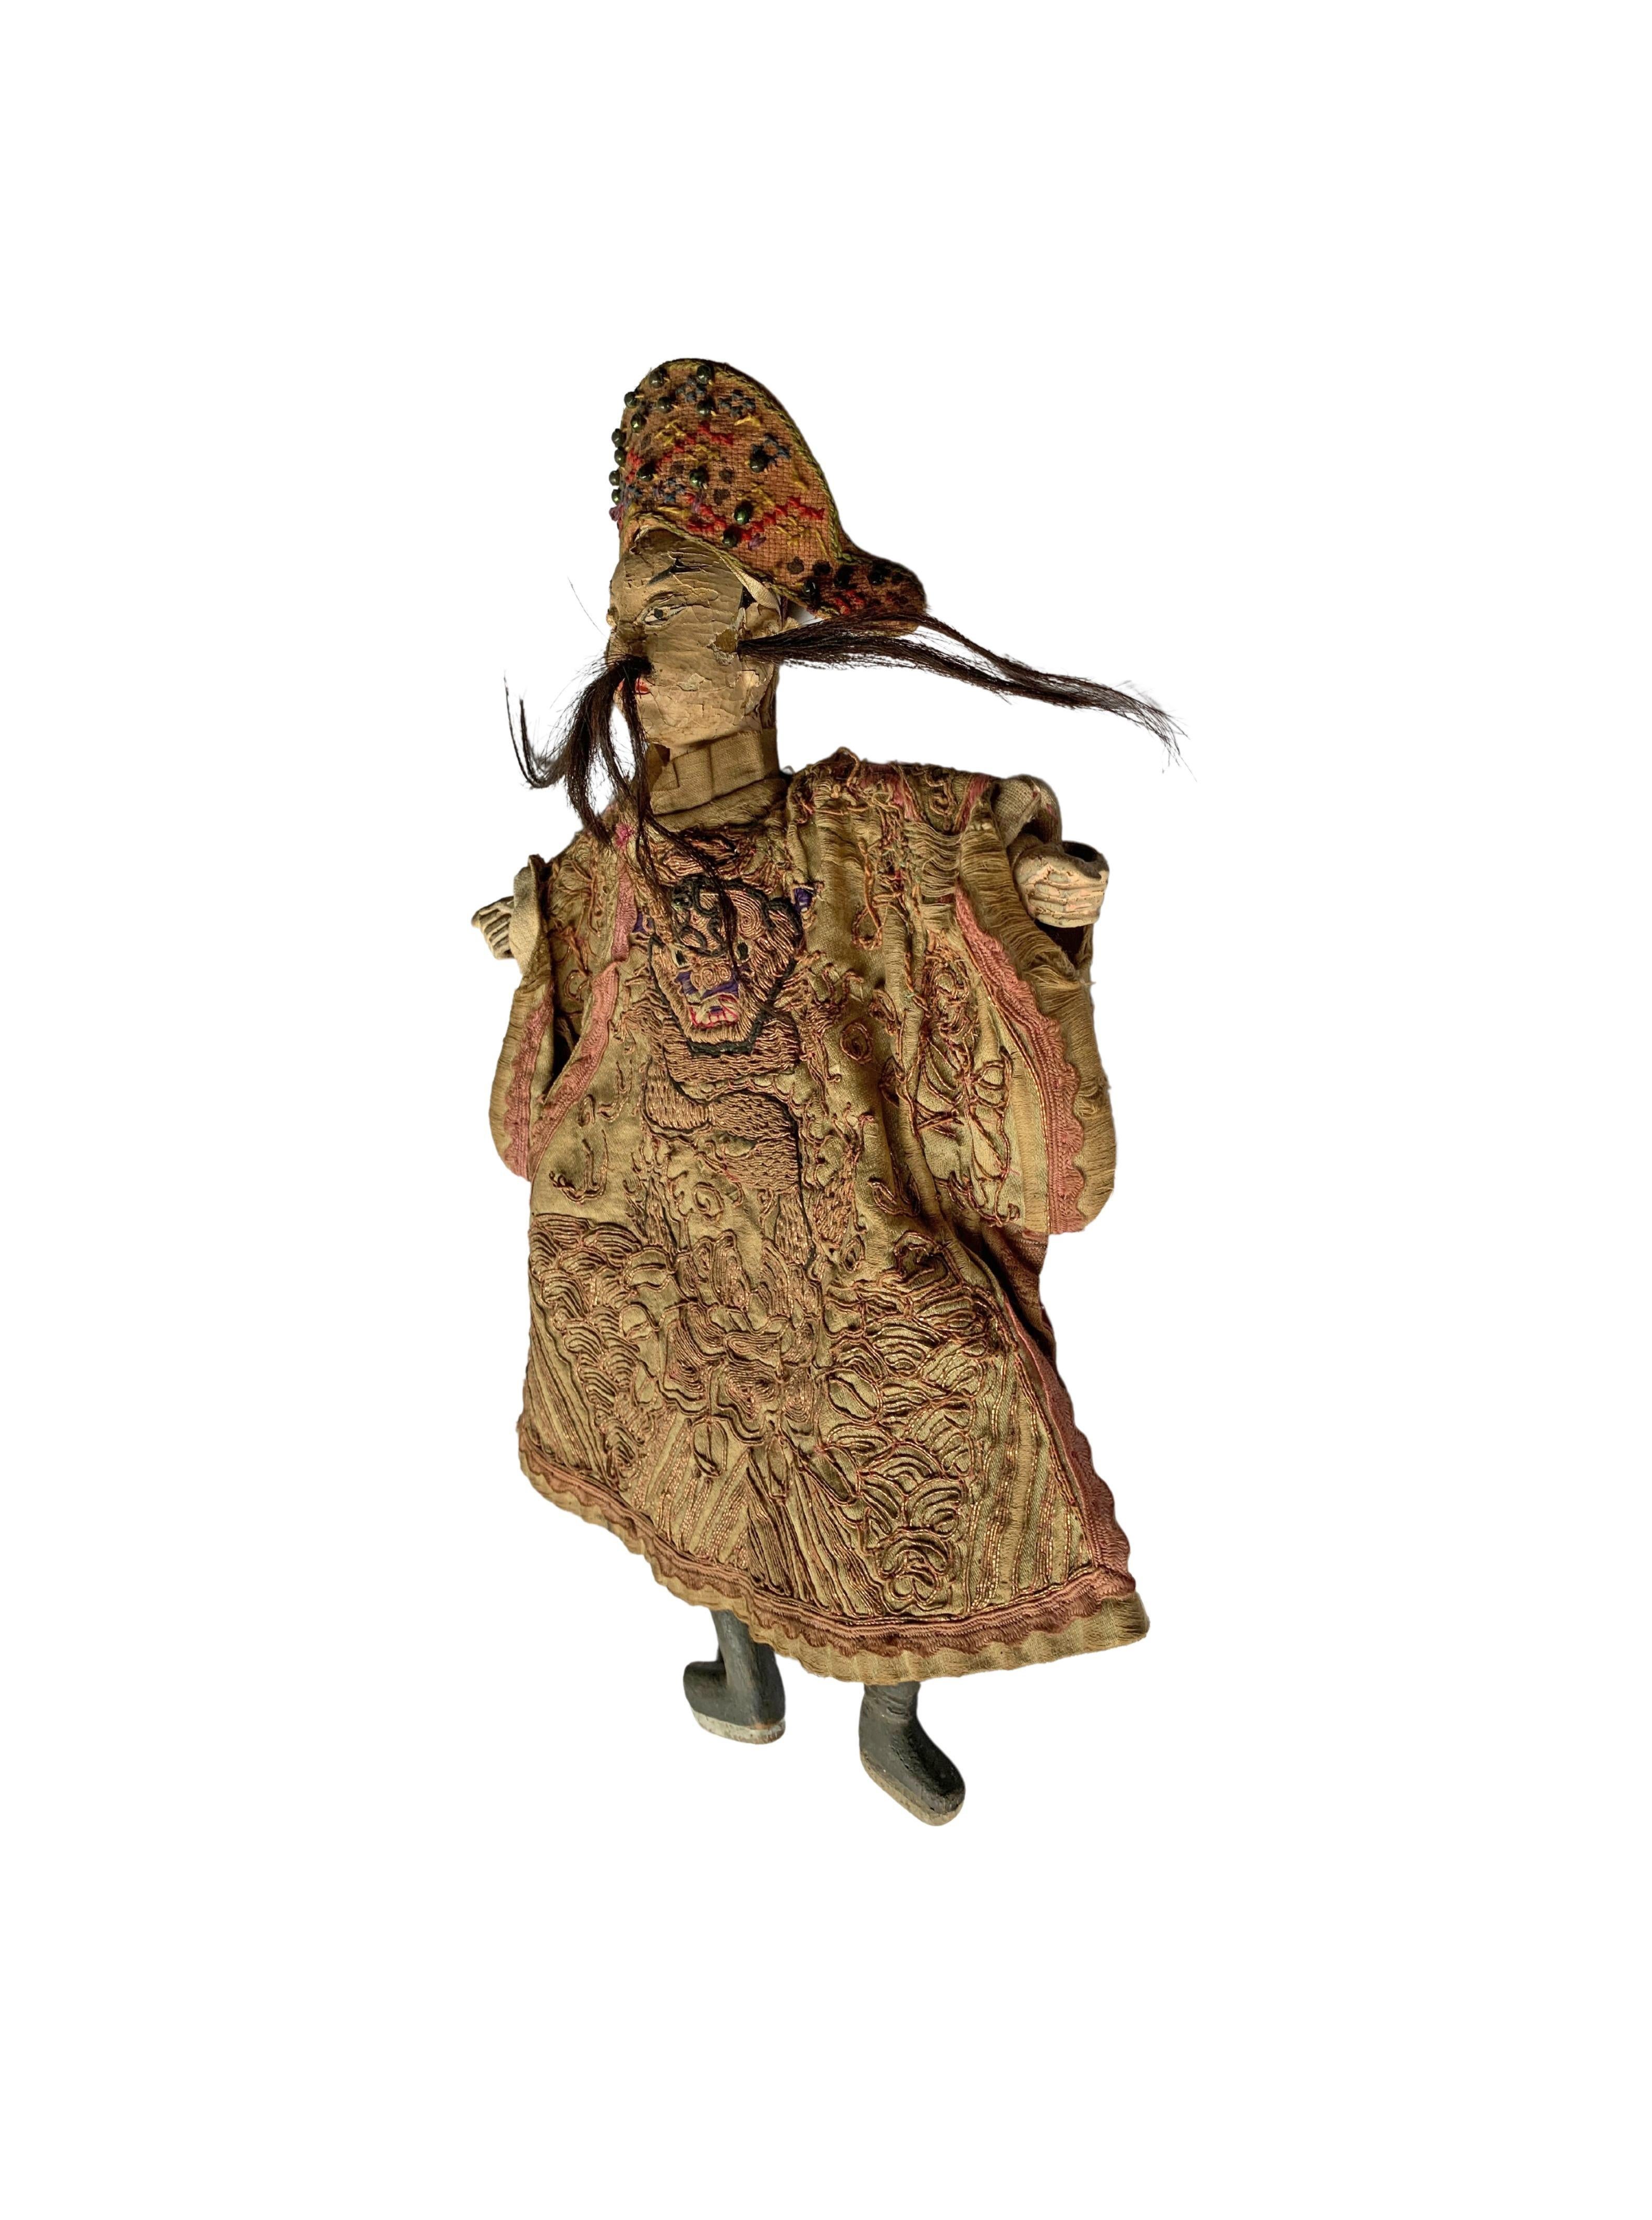 Hand-Crafted Musuem Quality 19th Century Chinese Hand-Puppet 